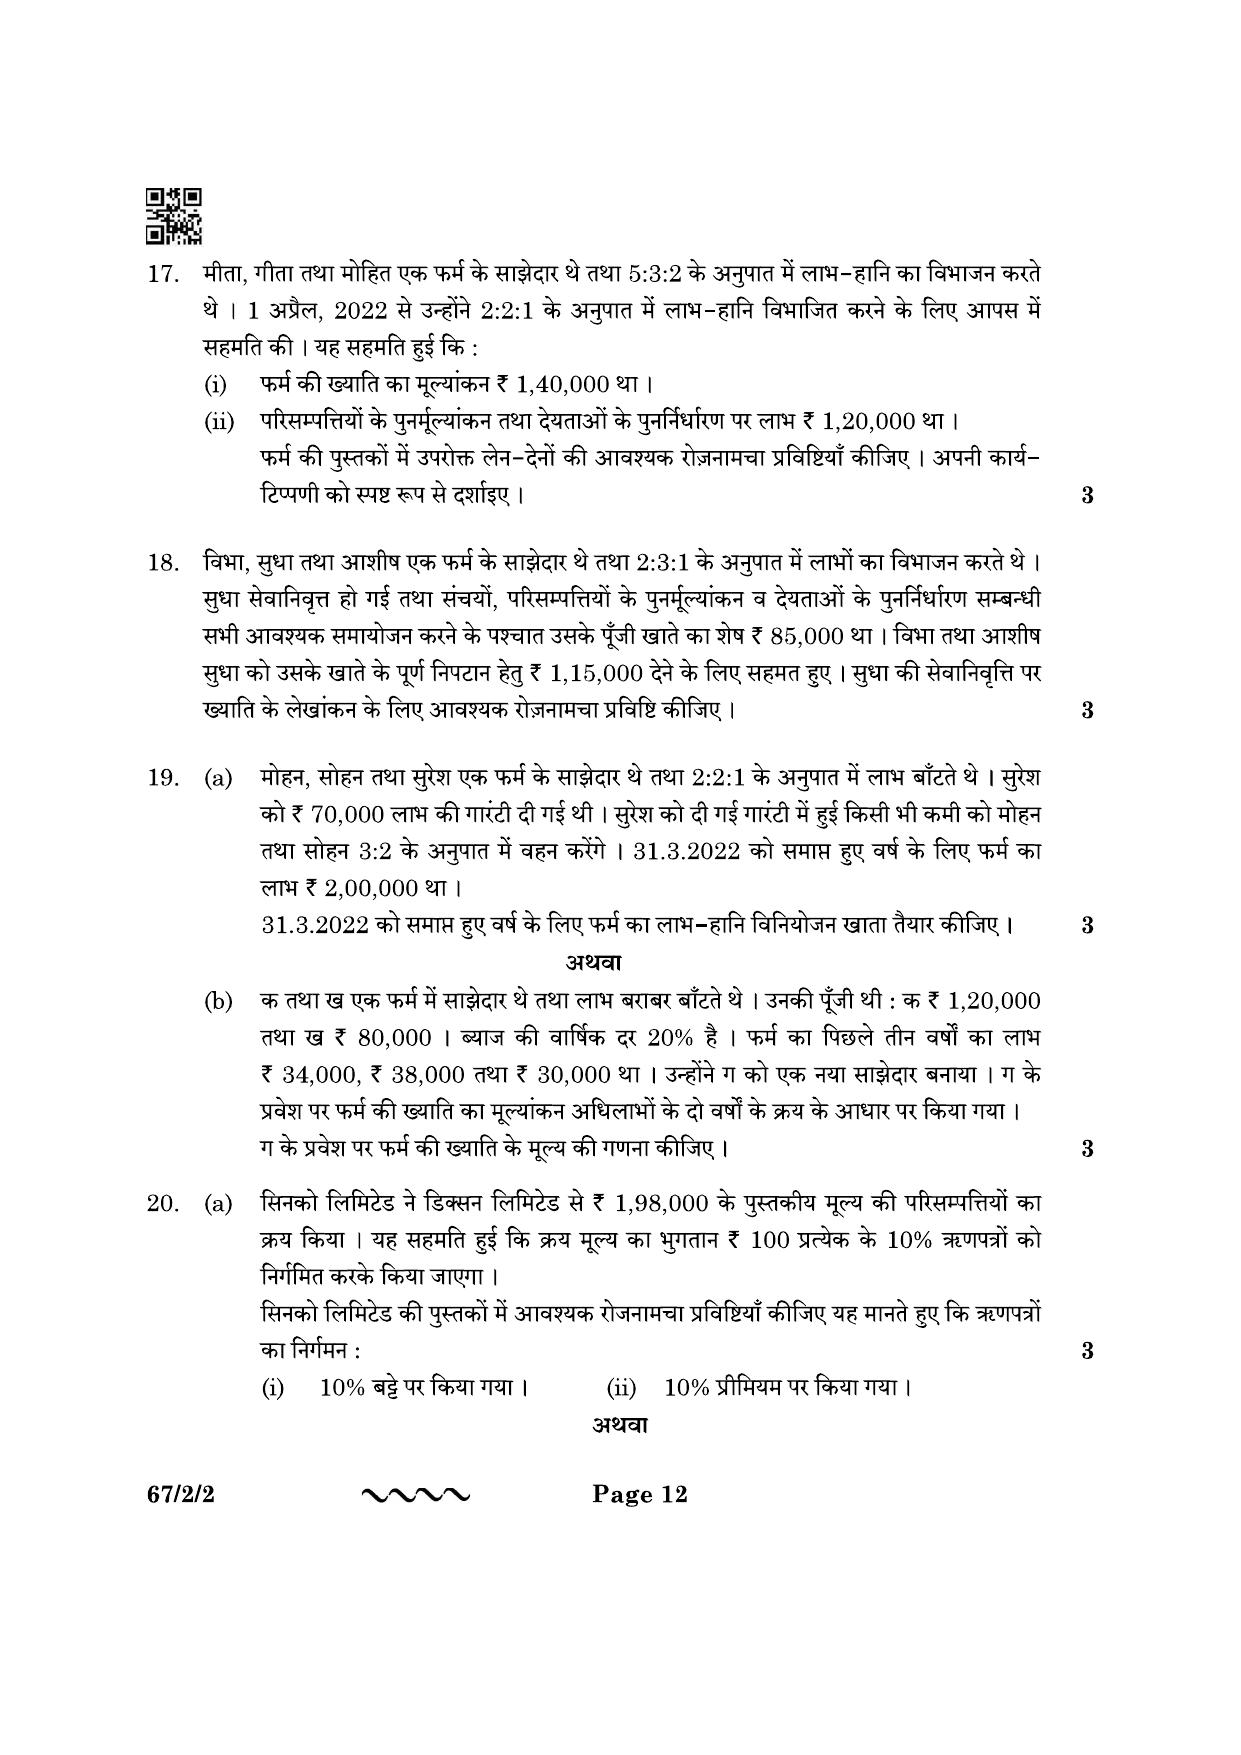 CBSE Class 12 67-2-2 Accountancy 2023 Question Paper - Page 12